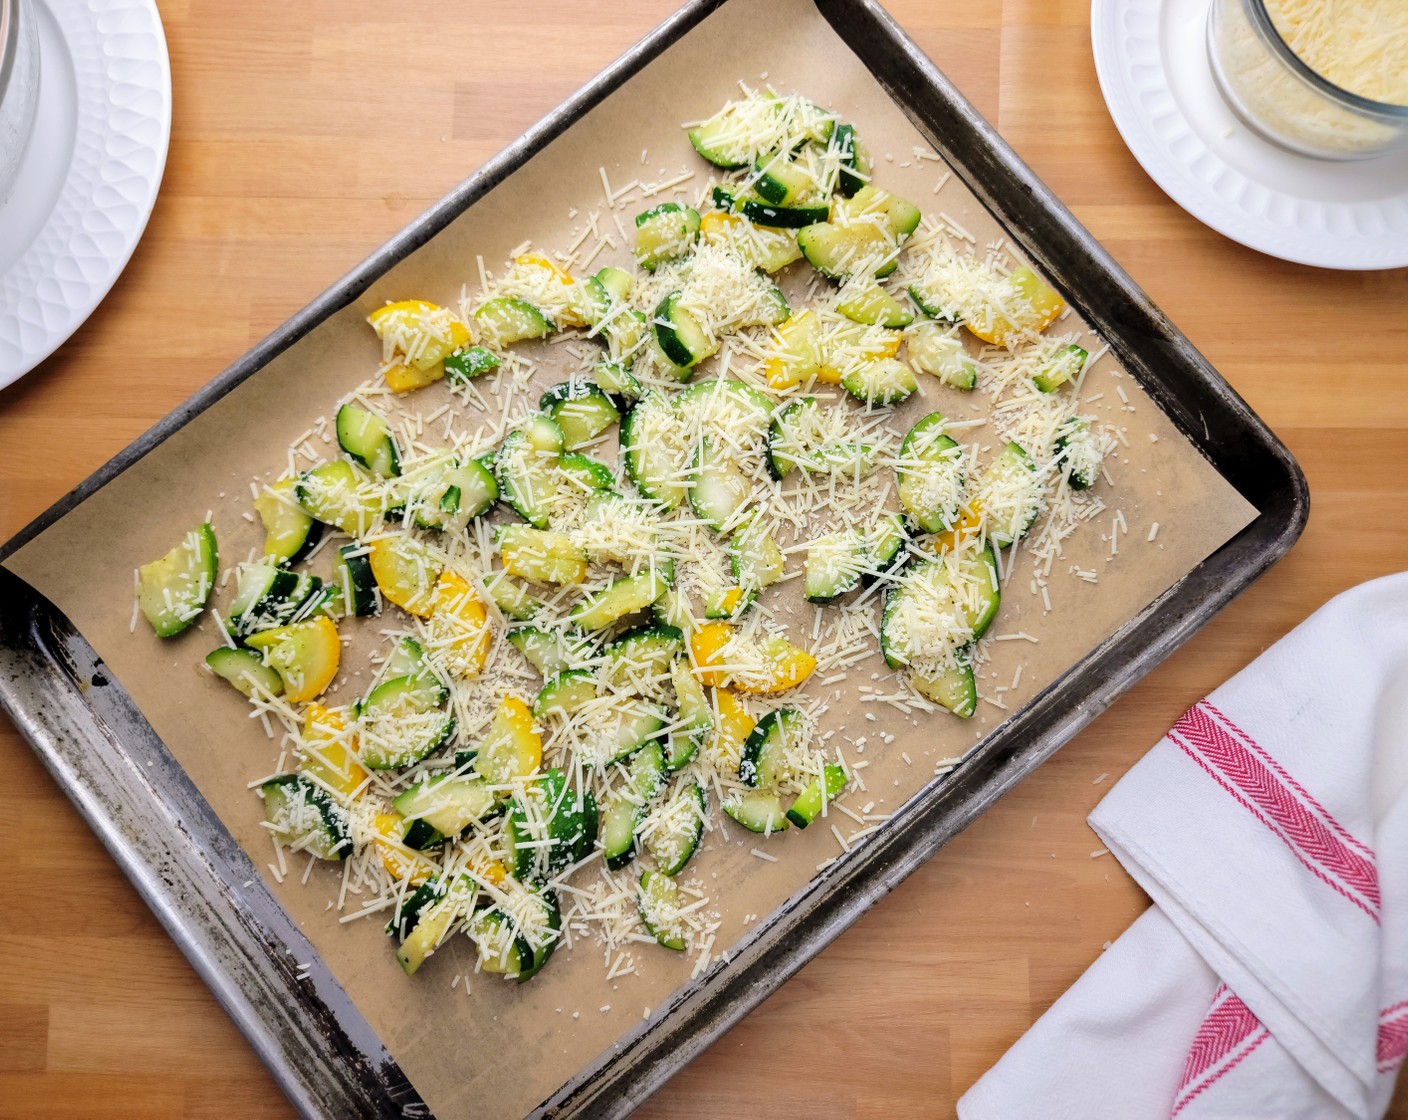 step 3 Spread the zucchini blend onto a lined sheet pan. Sprinkle the zucchini slices with Shredded Parmesan Cheese (3/4 cup).